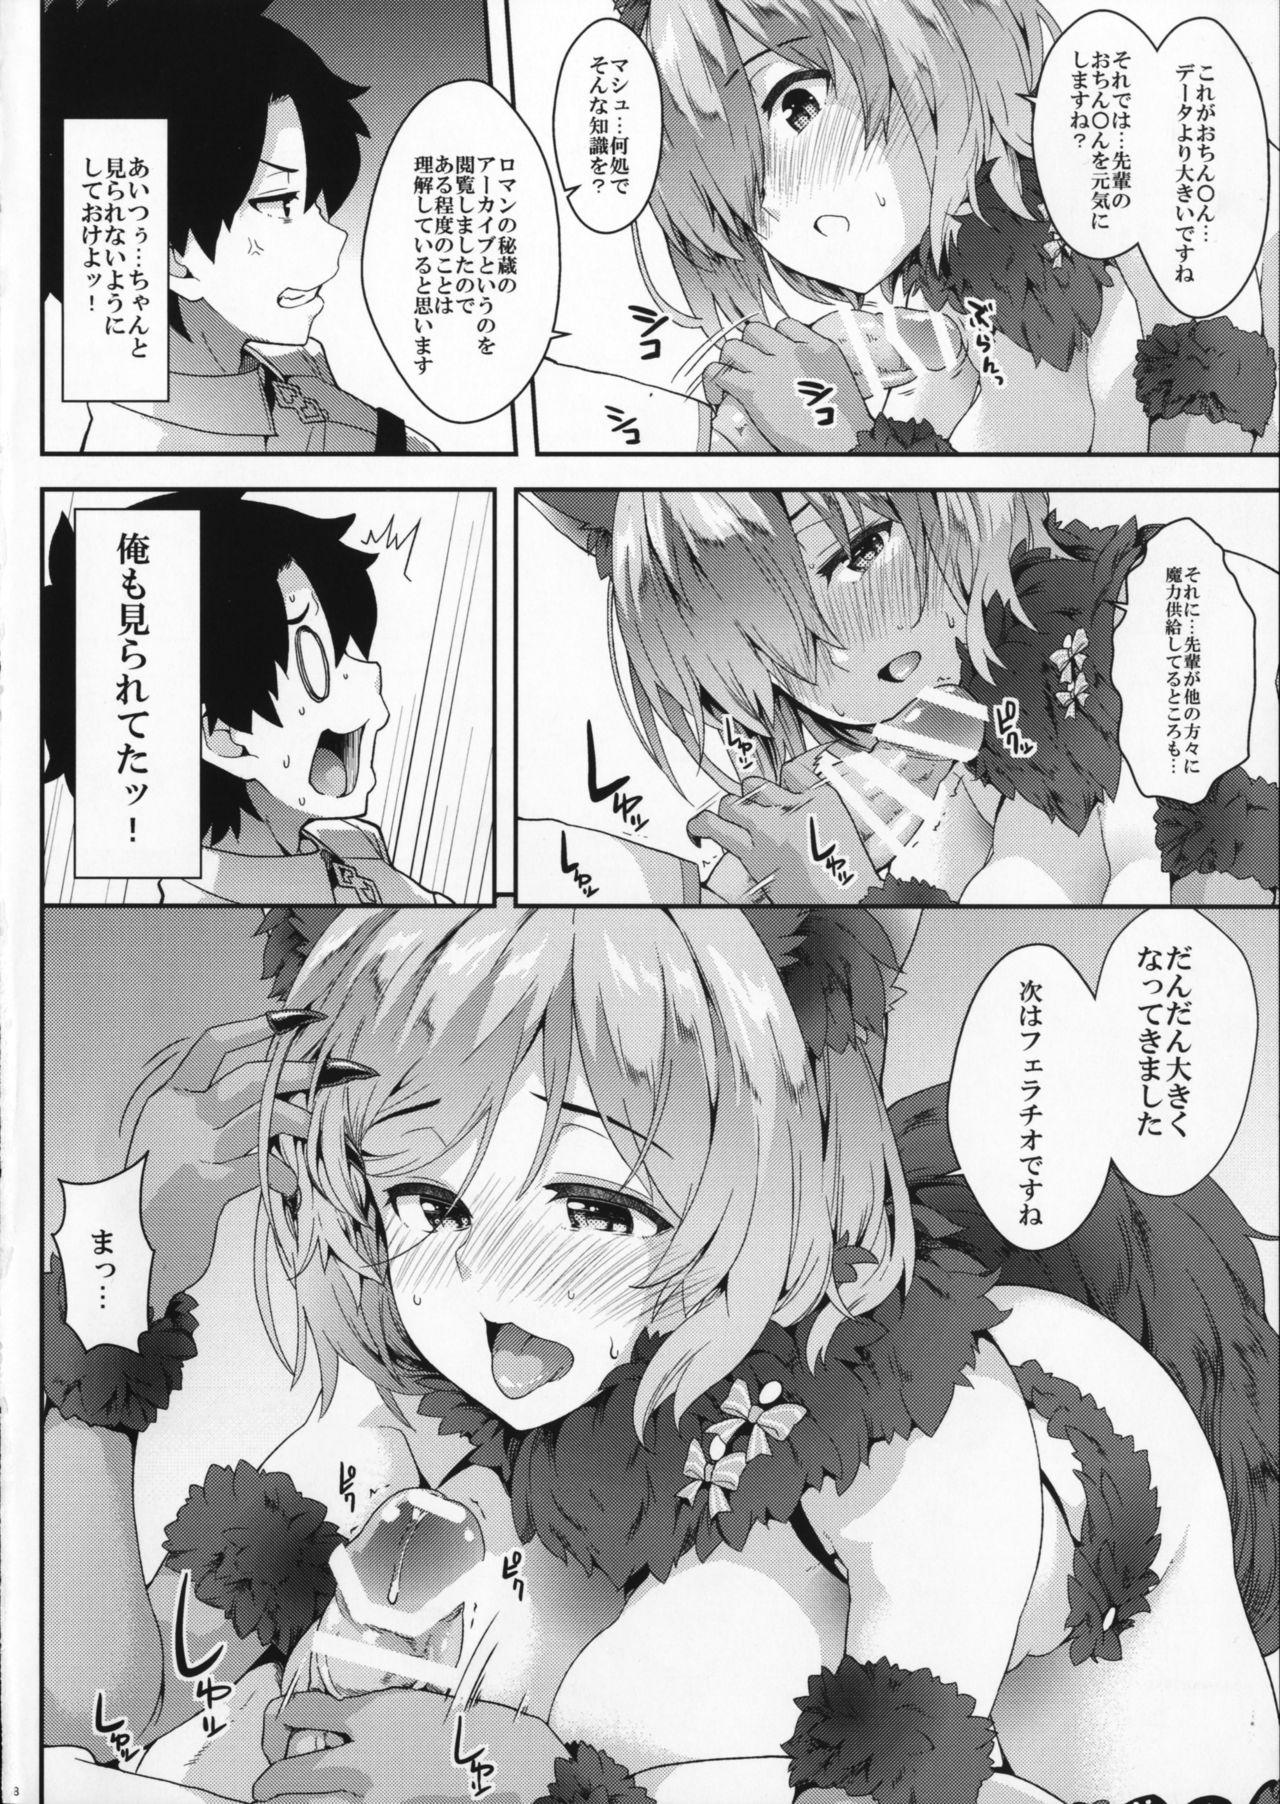 Spy Why am I jealous of you? - Fate grand order Masturbating - Page 7